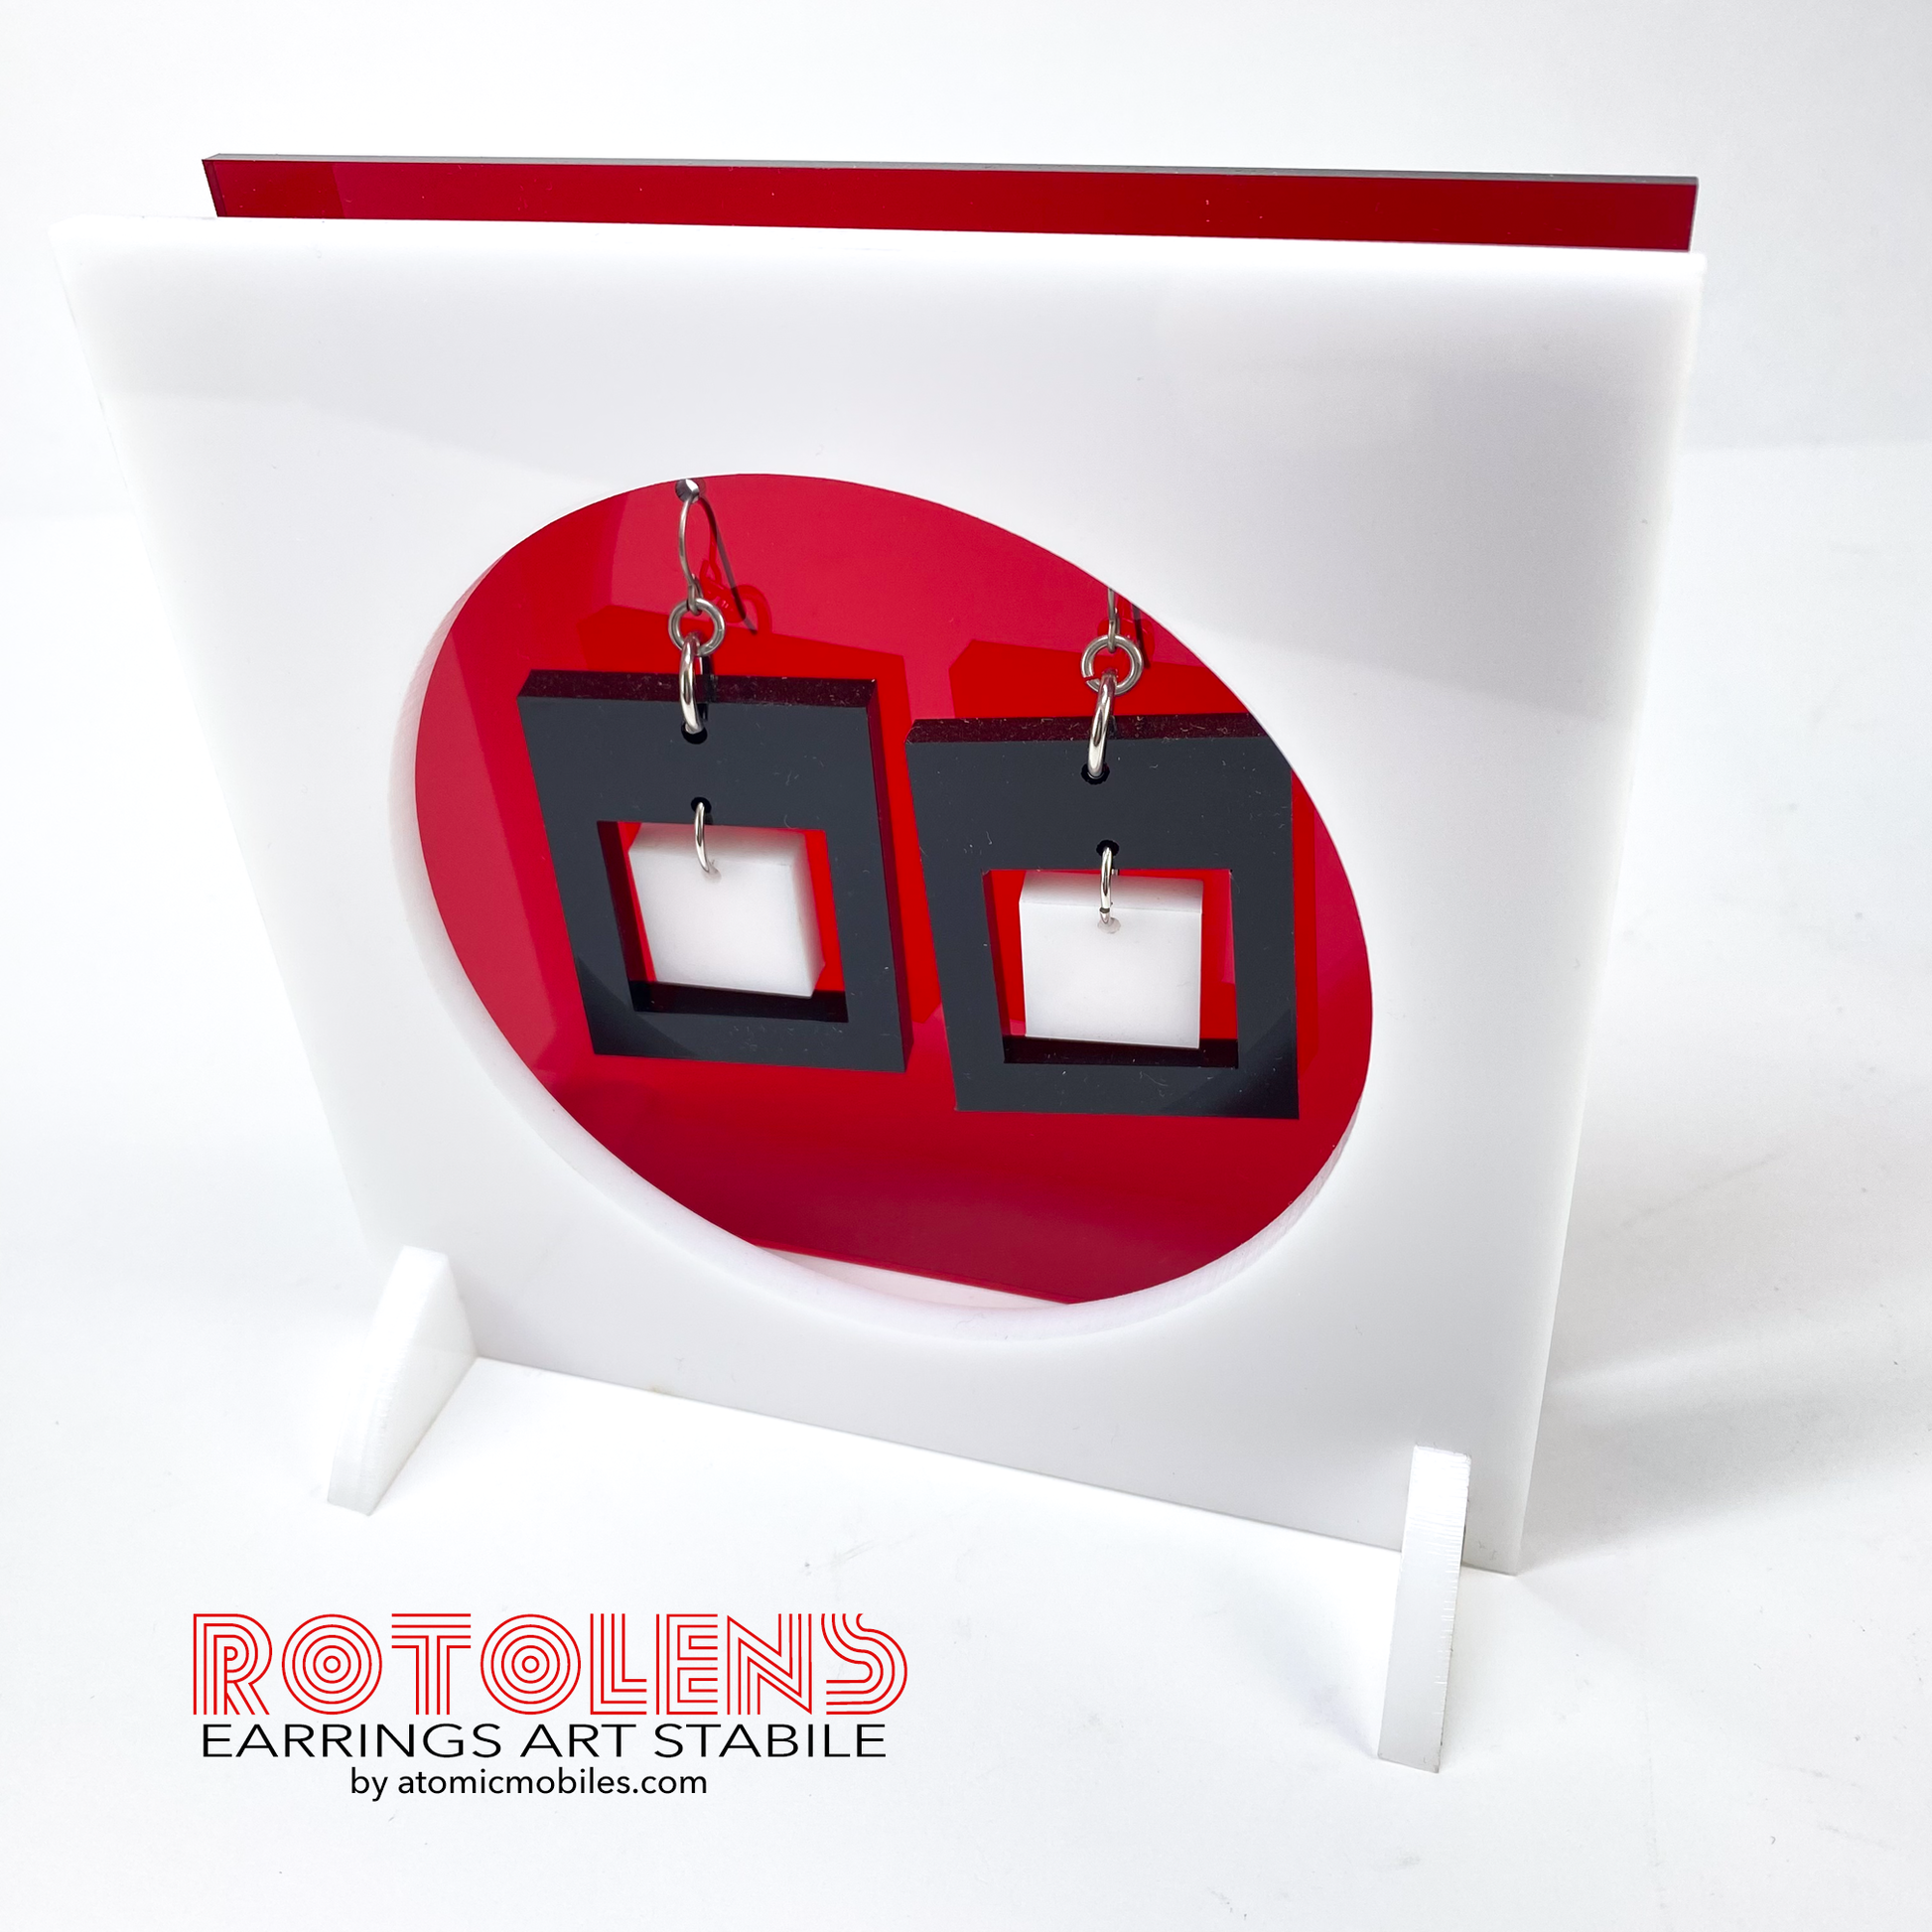 Stunning Art Earrings Stabile Set featuring transparent red backing with black and white earrings - mid century modern art for Groovy People by AtomicMobiles.com